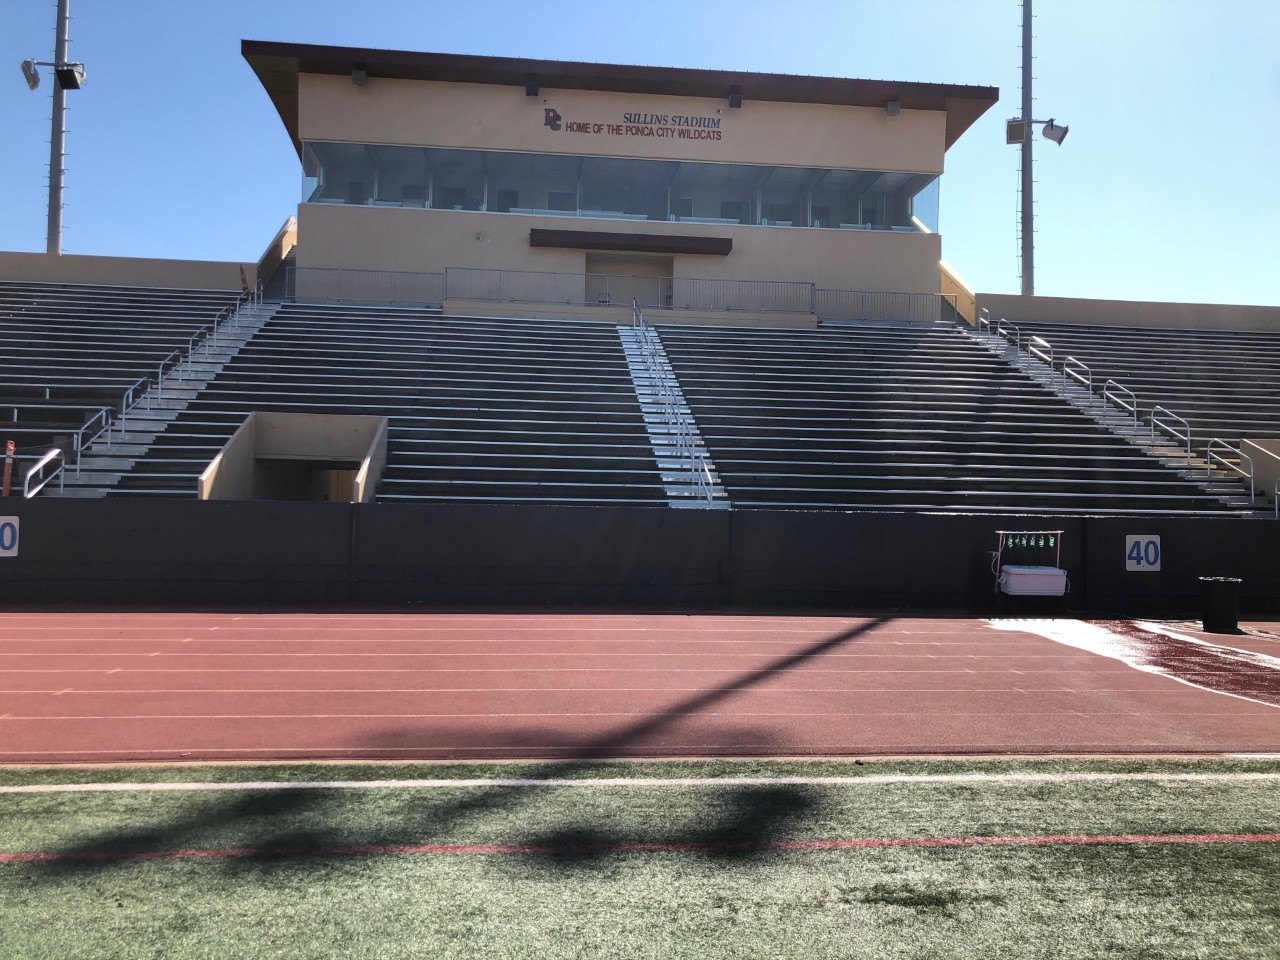 School  district reminds fans of reserved seating at Sullins Stadium